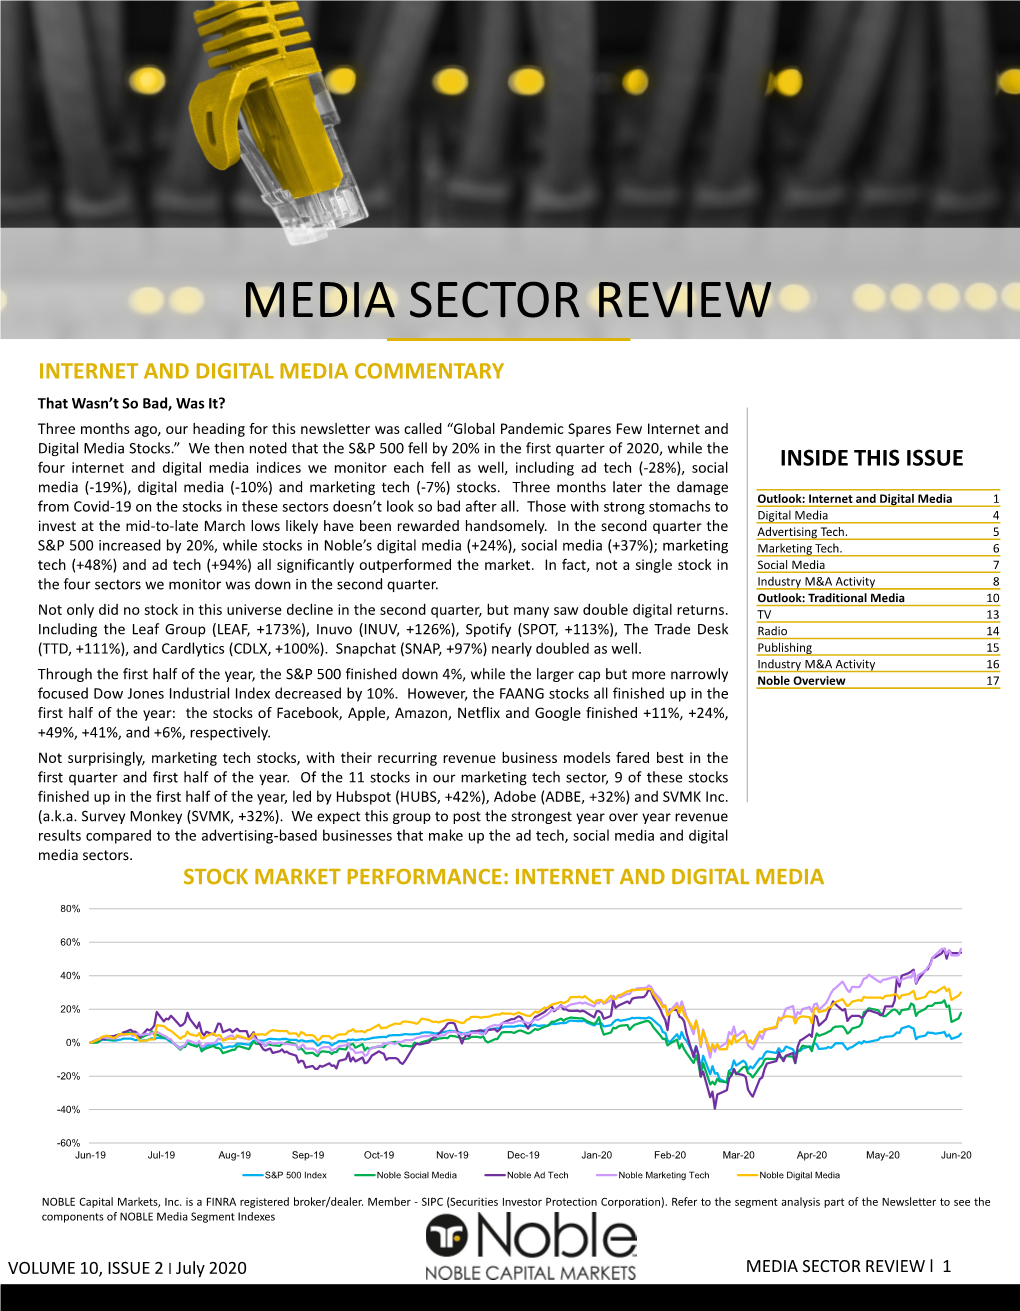 Media Sector Review